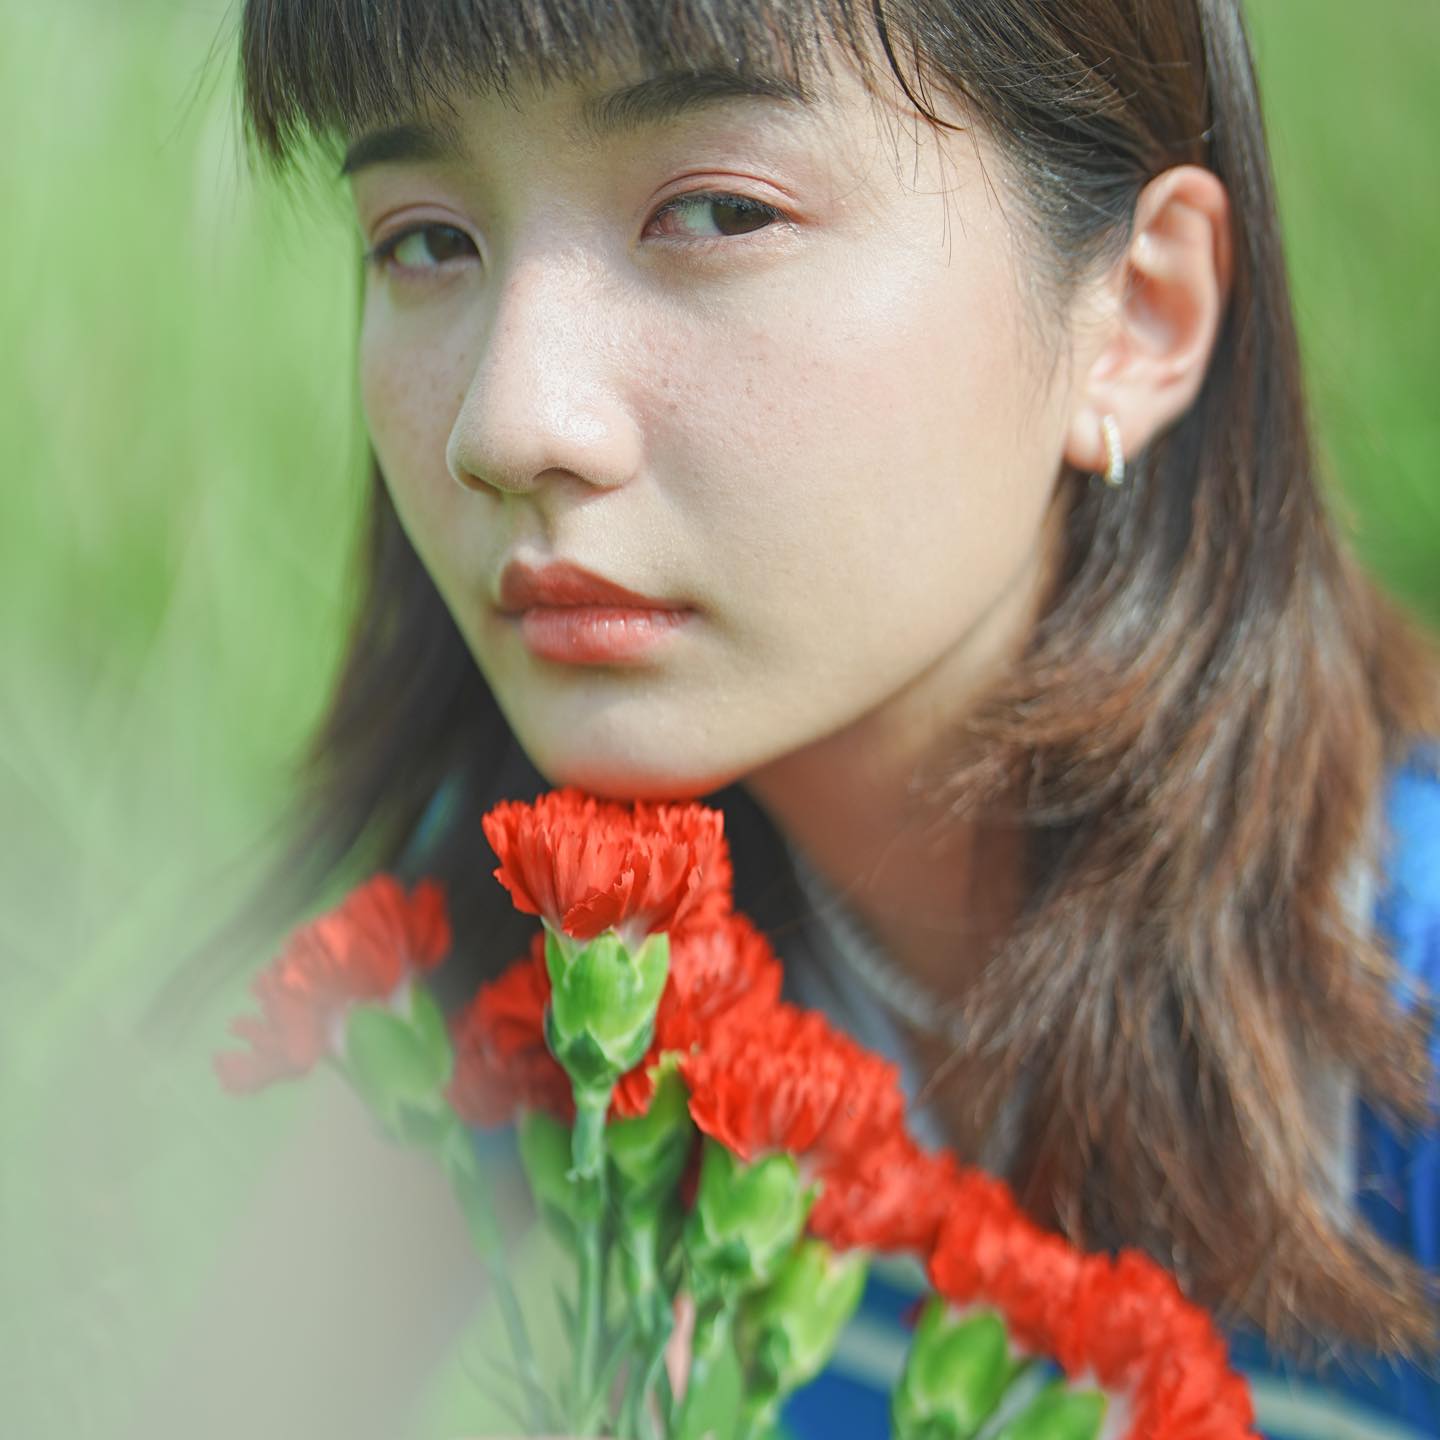 Close-up of girl with bangs and light make-up looking at the camera, with a bunch of red flowers in front of her